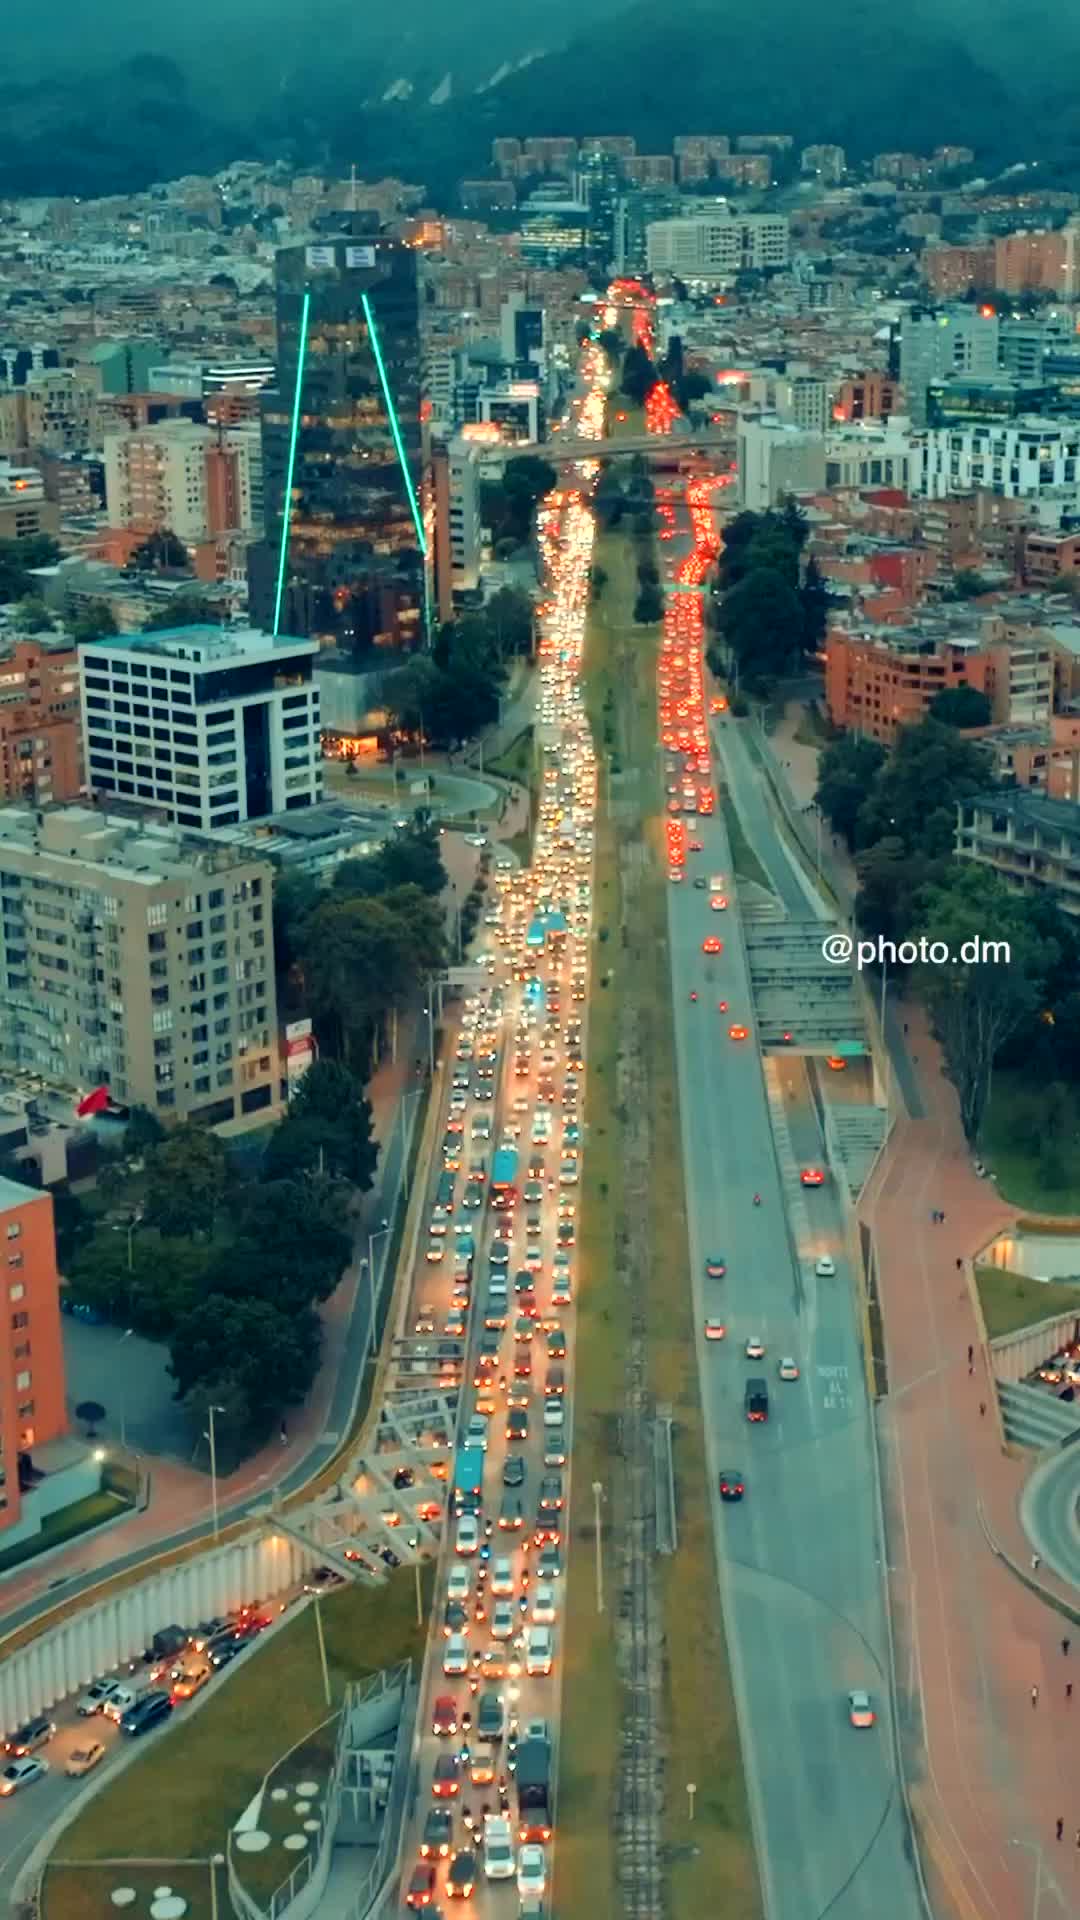 Aerial View of Bogotá Traffic | Stunning Drone Footage